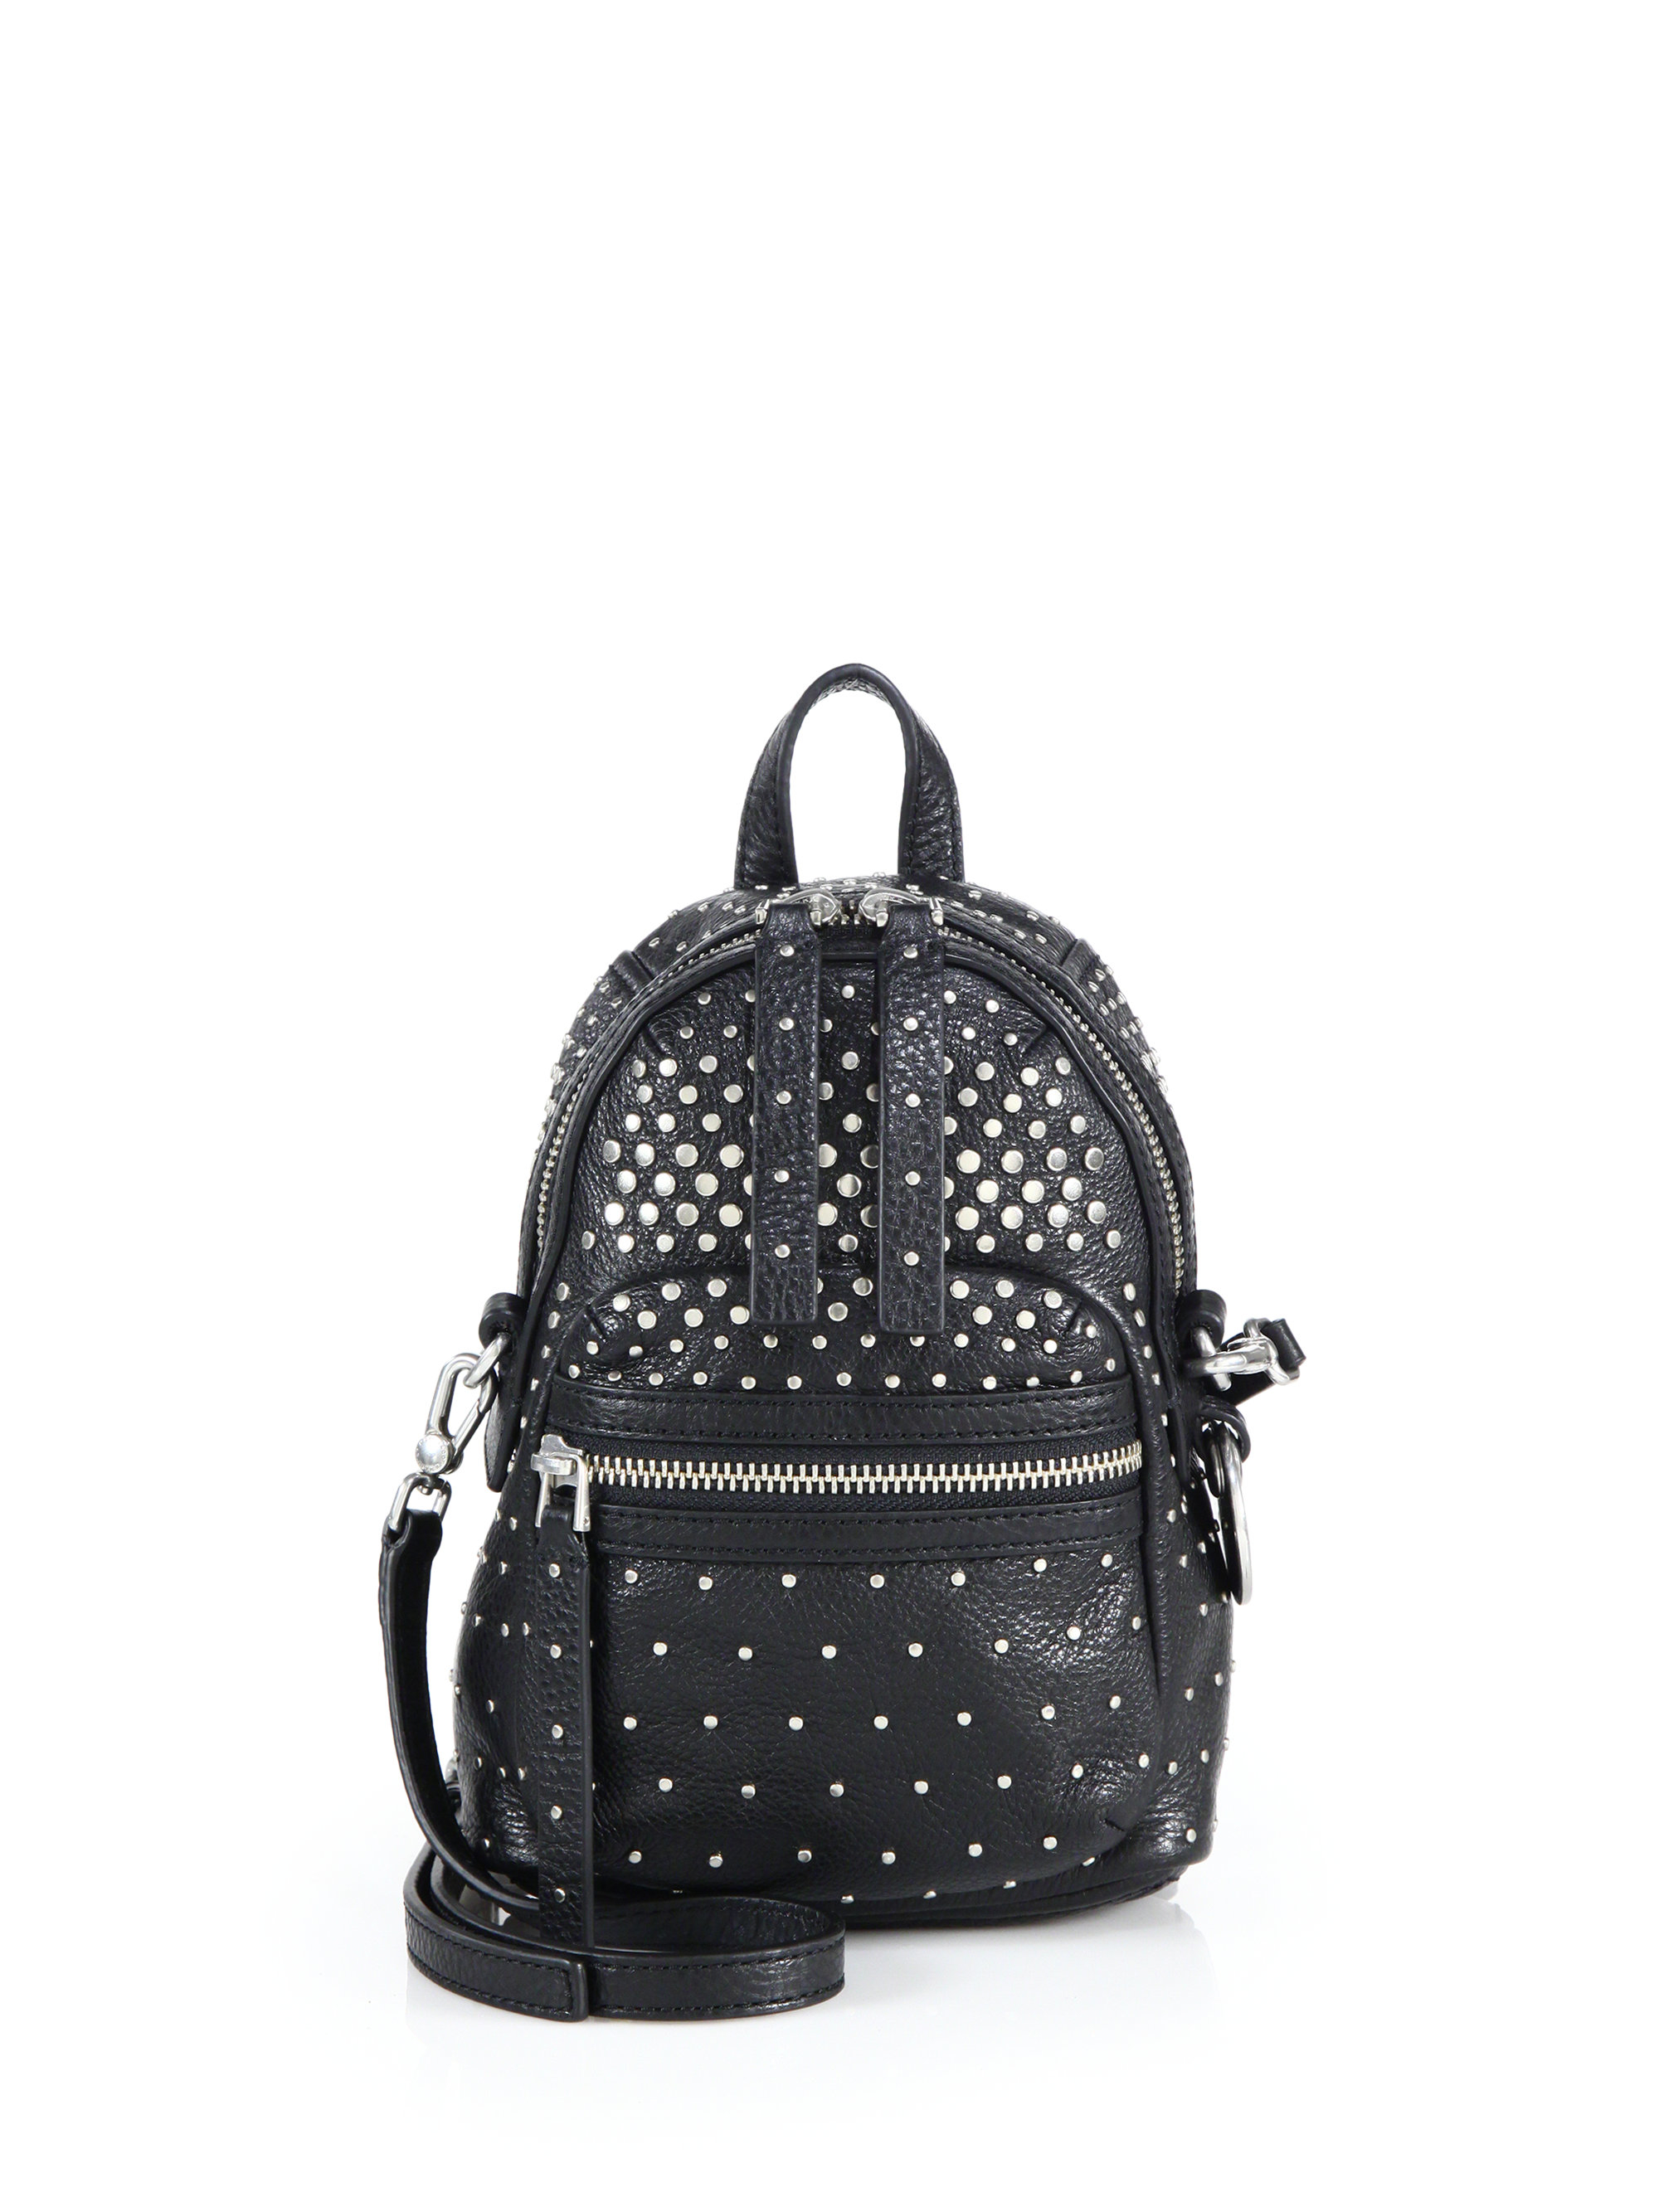 Lyst - Marc By Marc Jacobs Biker Studded Leather Crossbody Backpack in Black